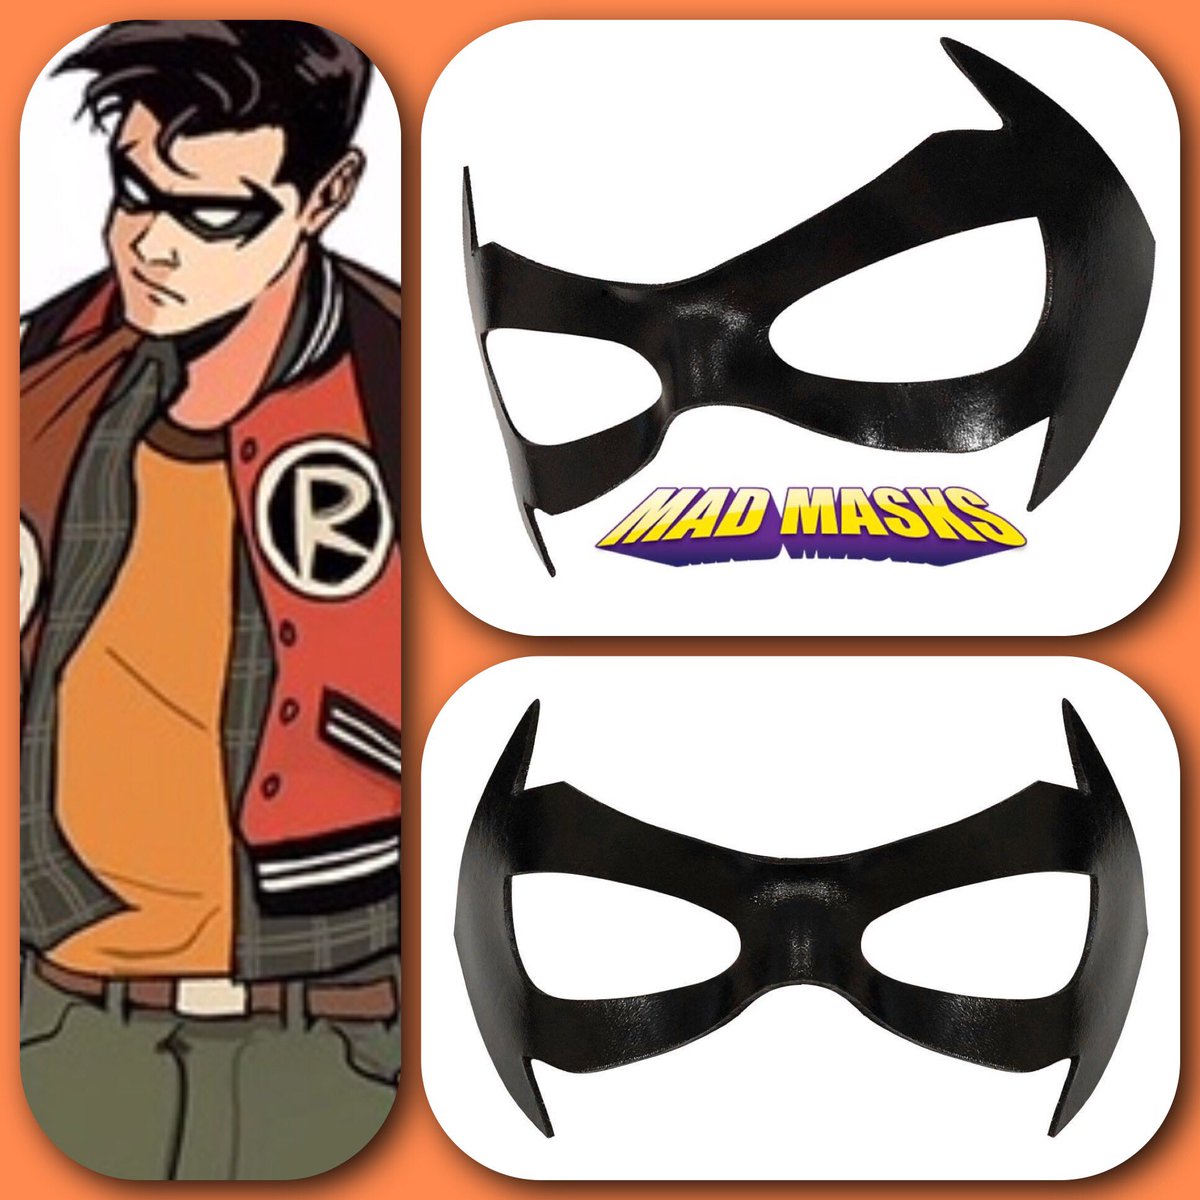 Mad Masks on Twitter: "Custom #robin mask ready ship! Thanks for the fun commission, Roberto❗️✍️🎨 . Be sure to submit your custom requests before Sept 9th. . #robincosplay #dickgrayson #teentitans #batman #